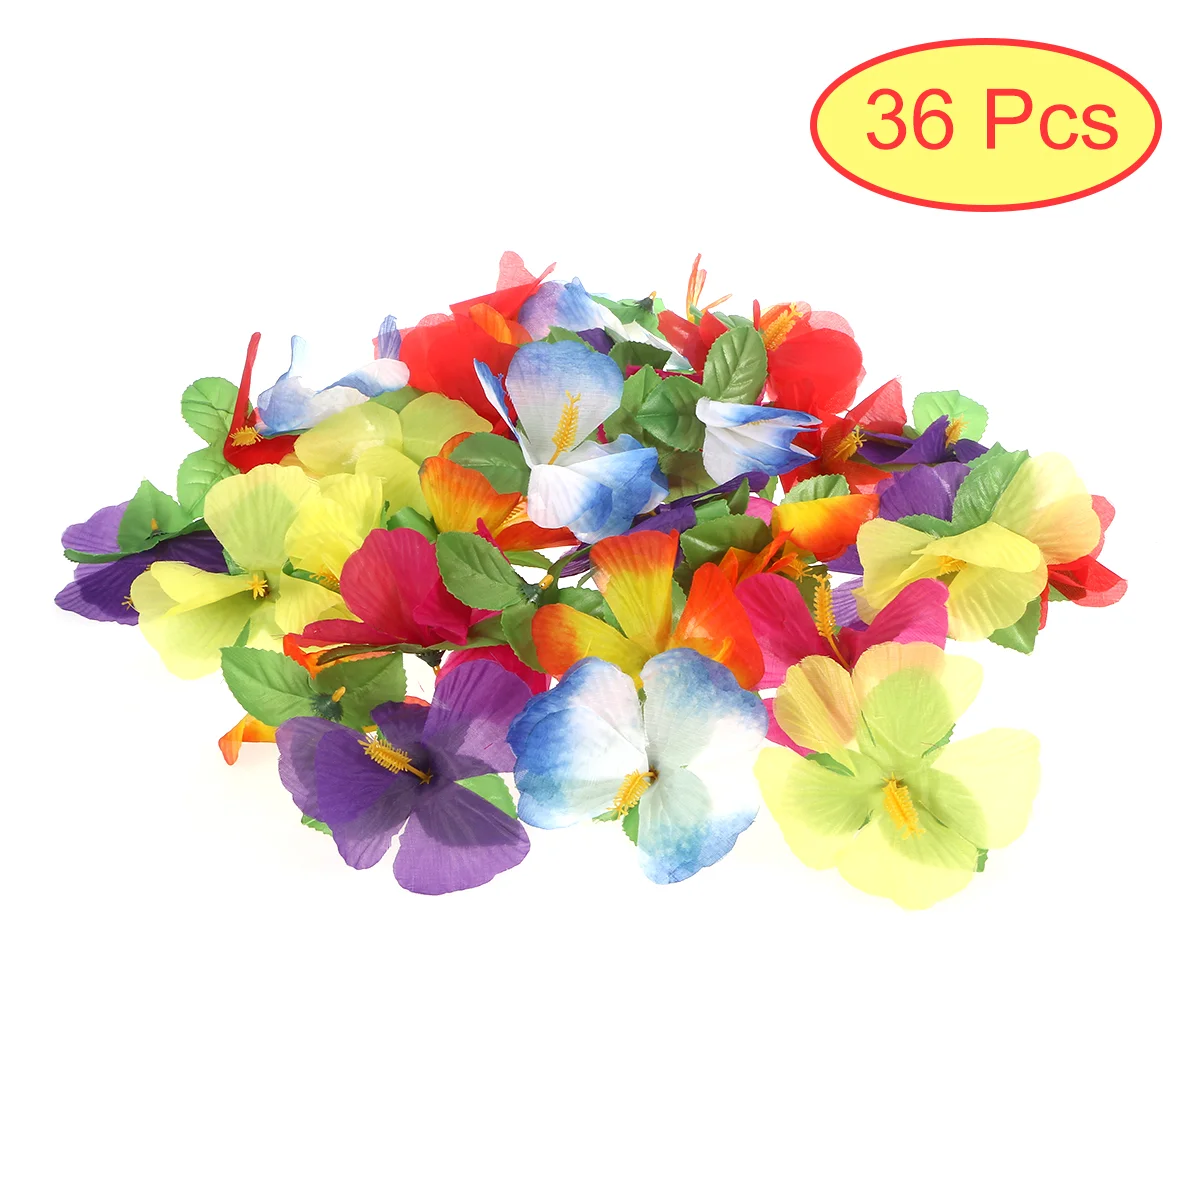 

24 Pcs Hawaii Flowers Colorful Hibiscus Mutabilis Faux Flower for Wedding Party Table Decor Banquet